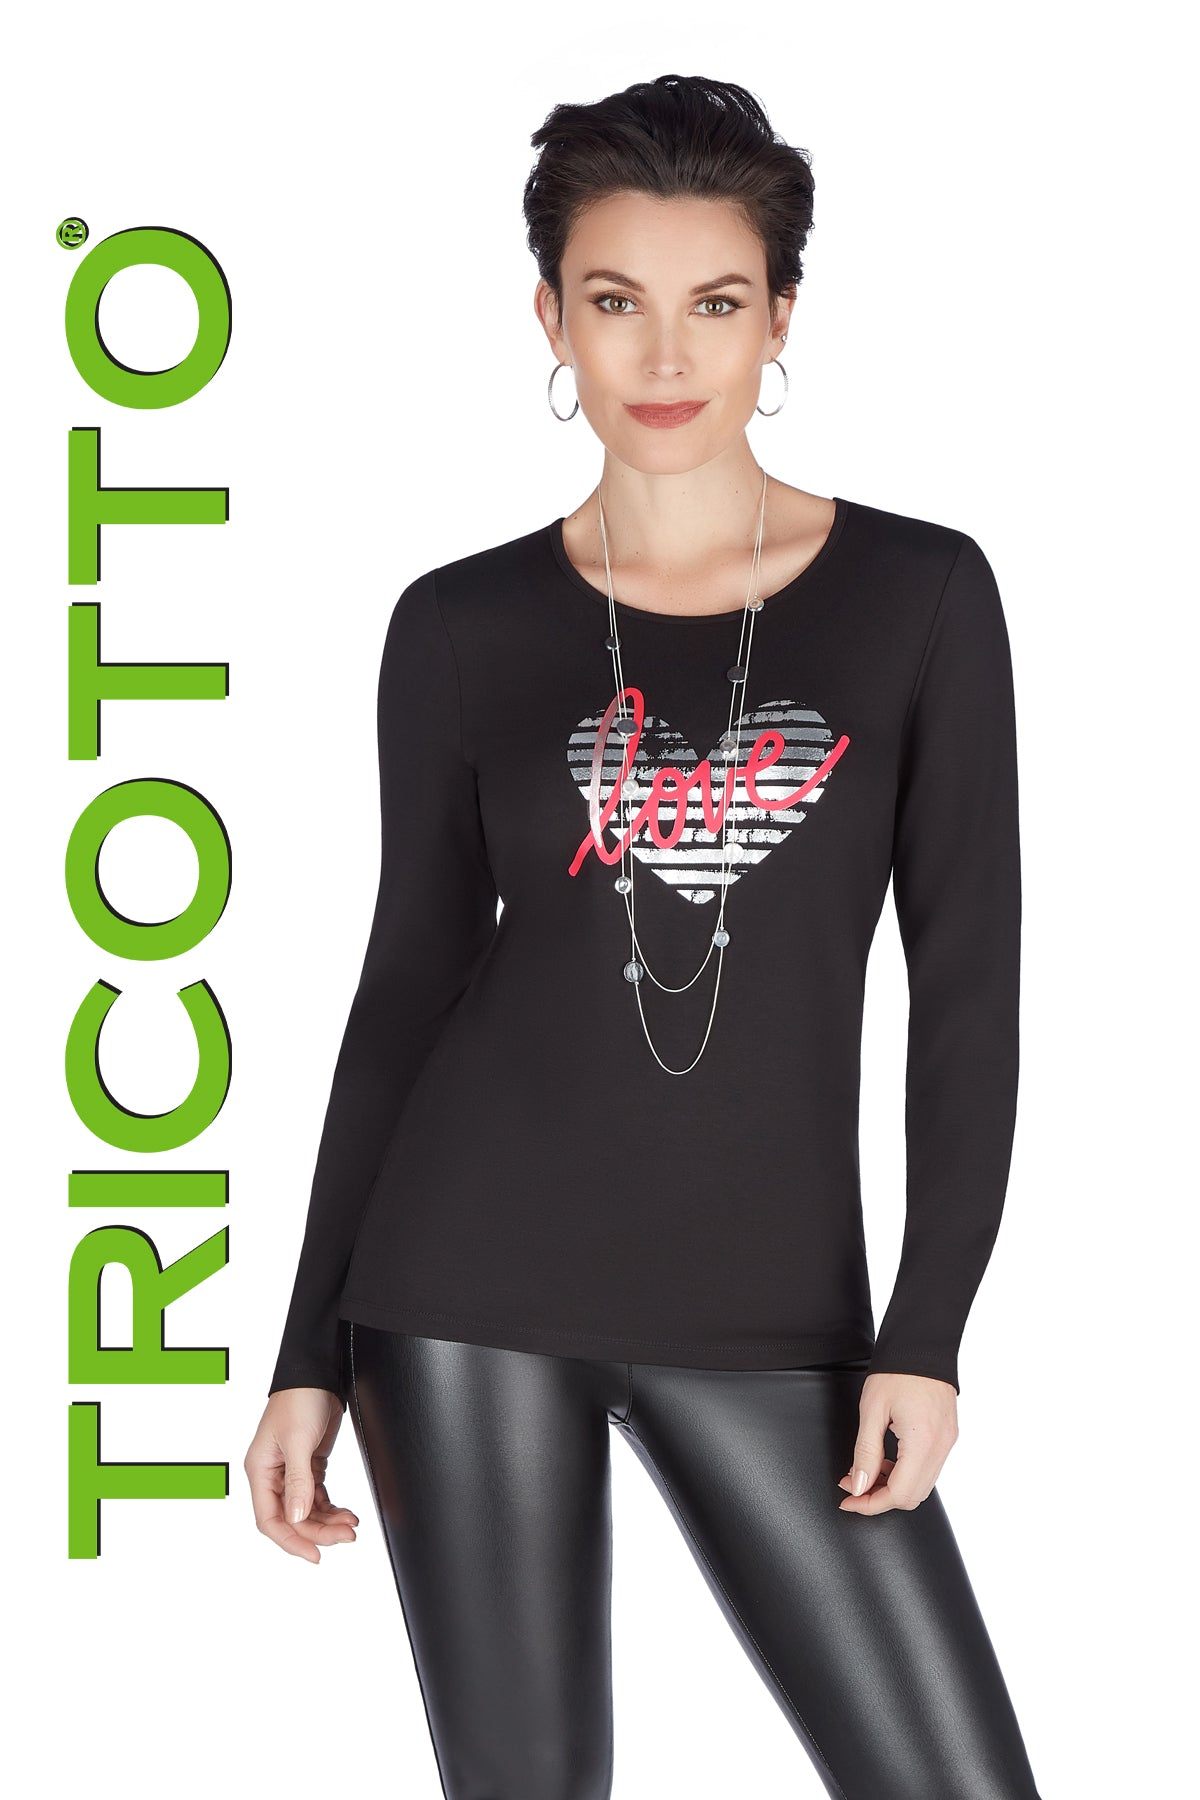 Tricotto T-shirts-Buy Tricotto T-shirts Online-Tricotto Fashion Montreal-Tricotto Fashion Quebec-Tricotto Online Shop